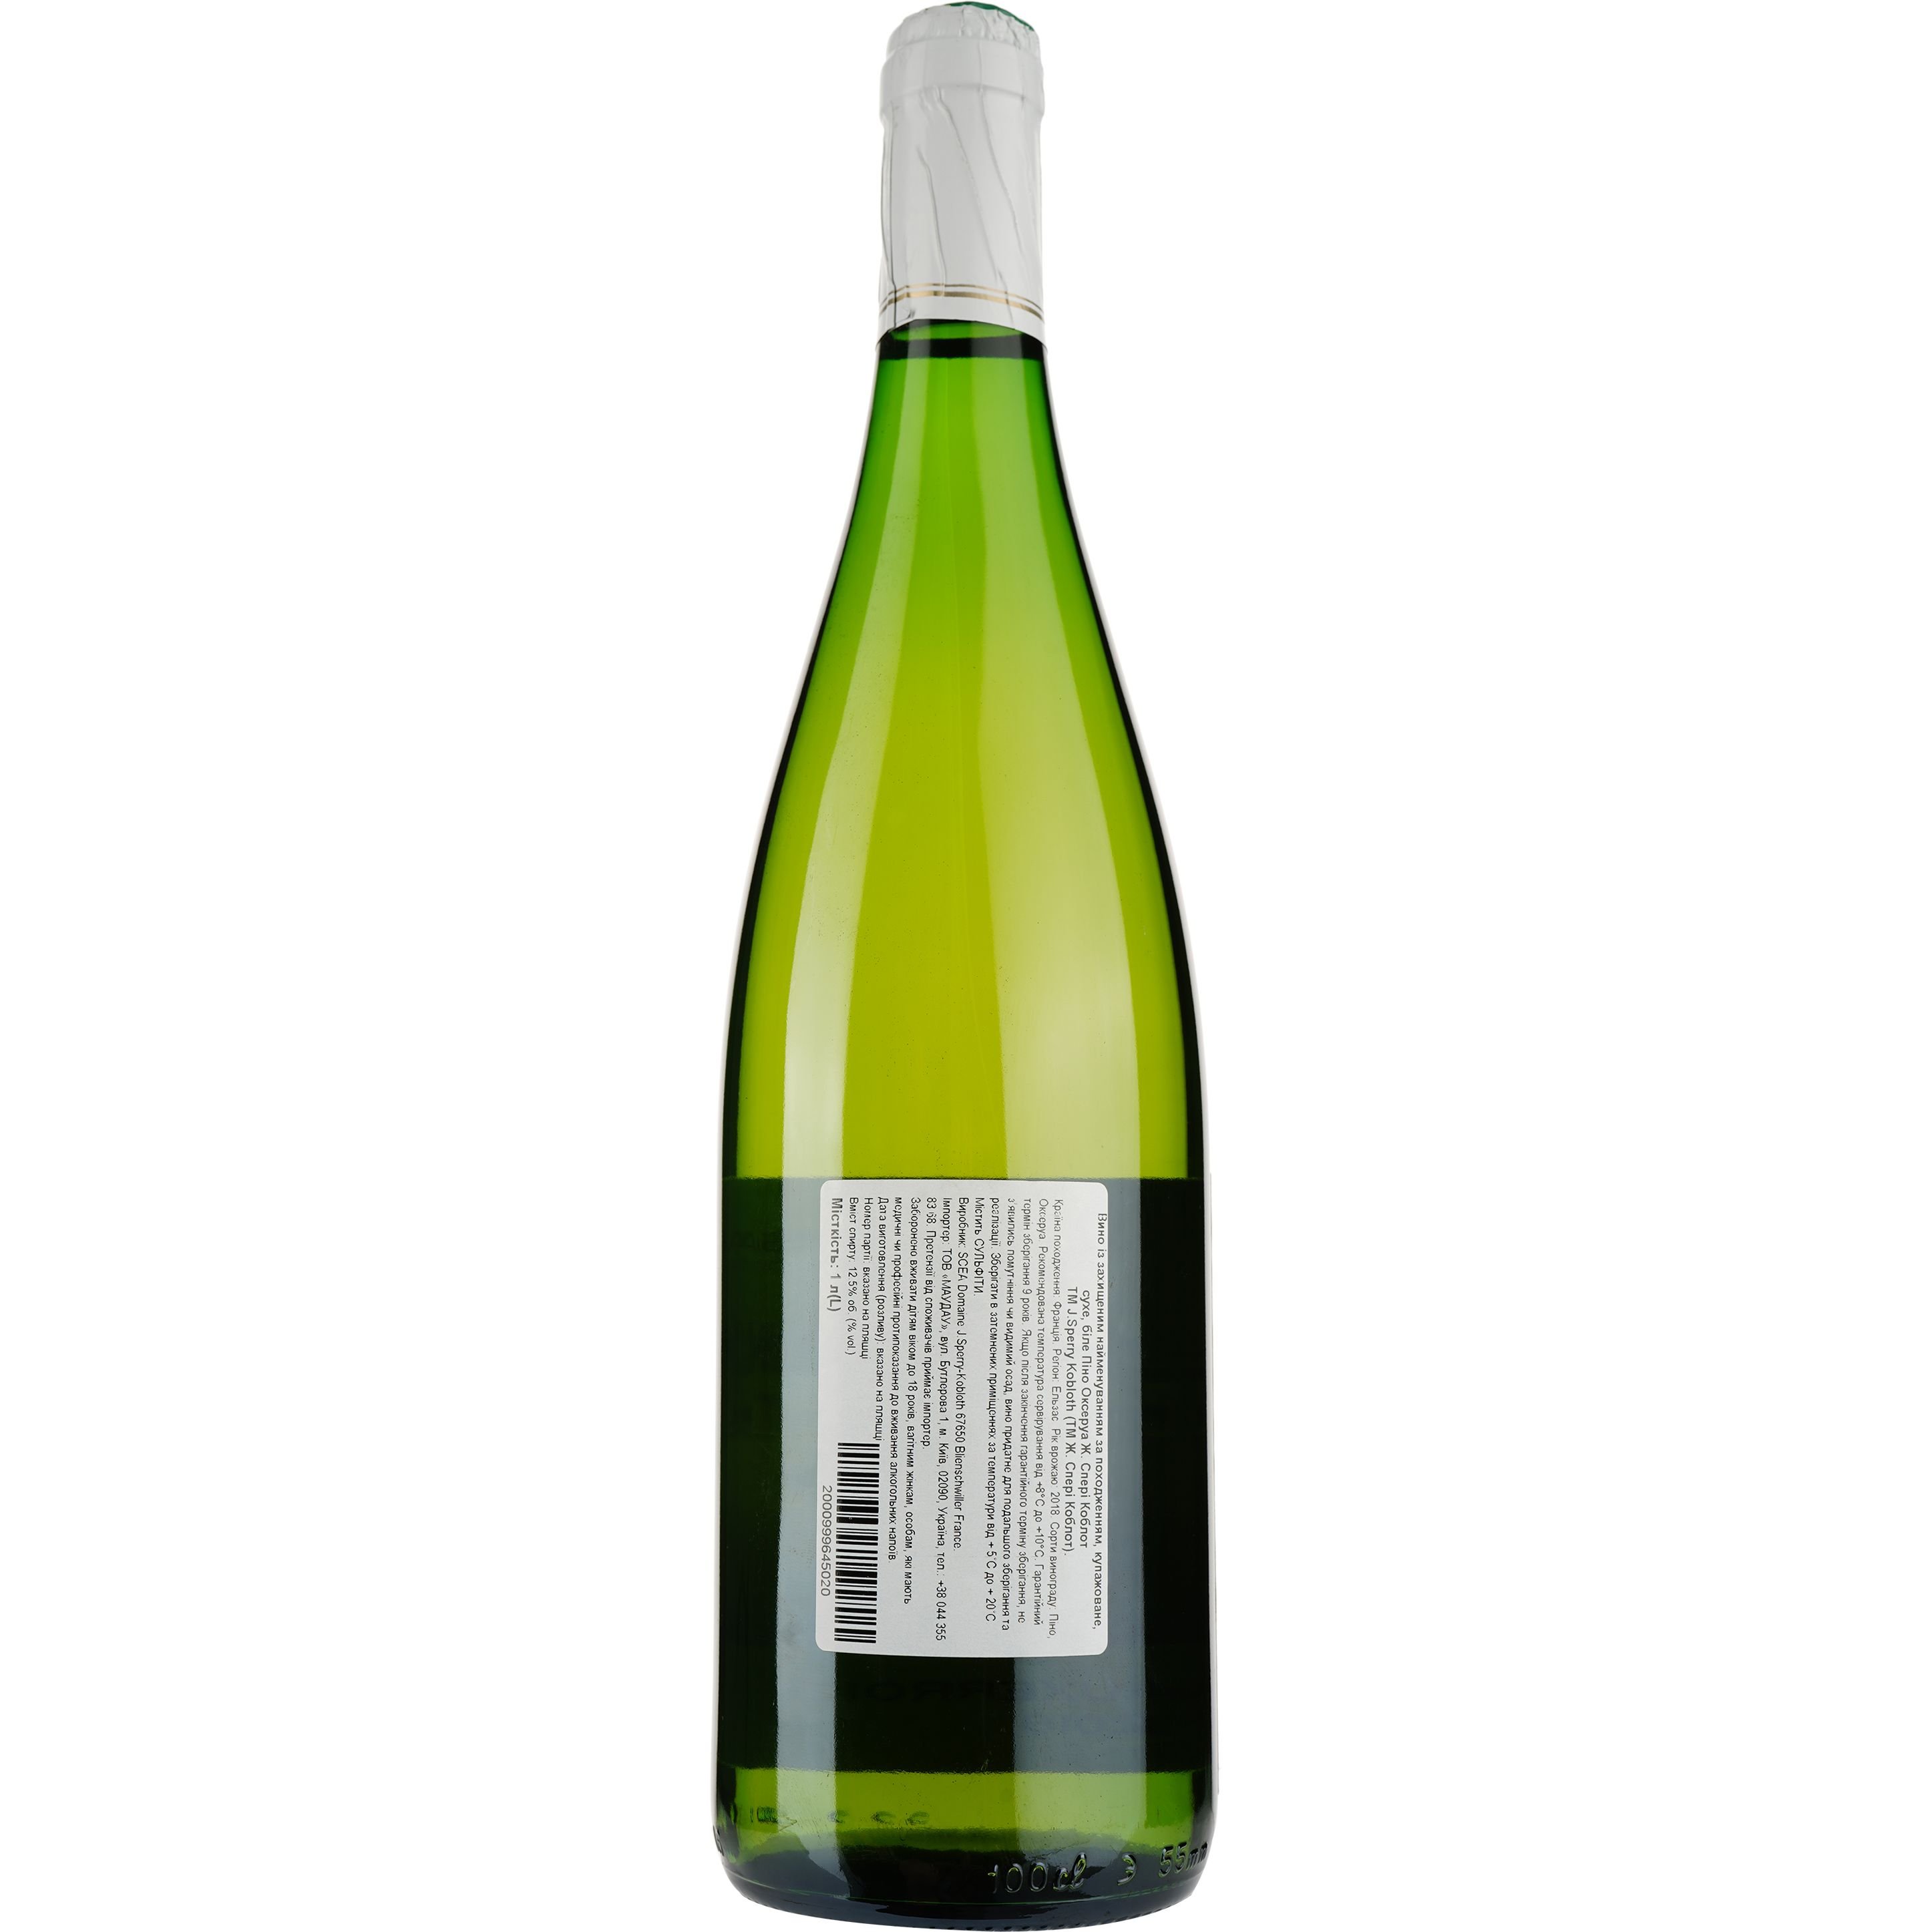 Вино Domaine J.Sperry Kobloth Pinot Auxerrois Alsace AOP, біле, сухе, 1 л - фото 2